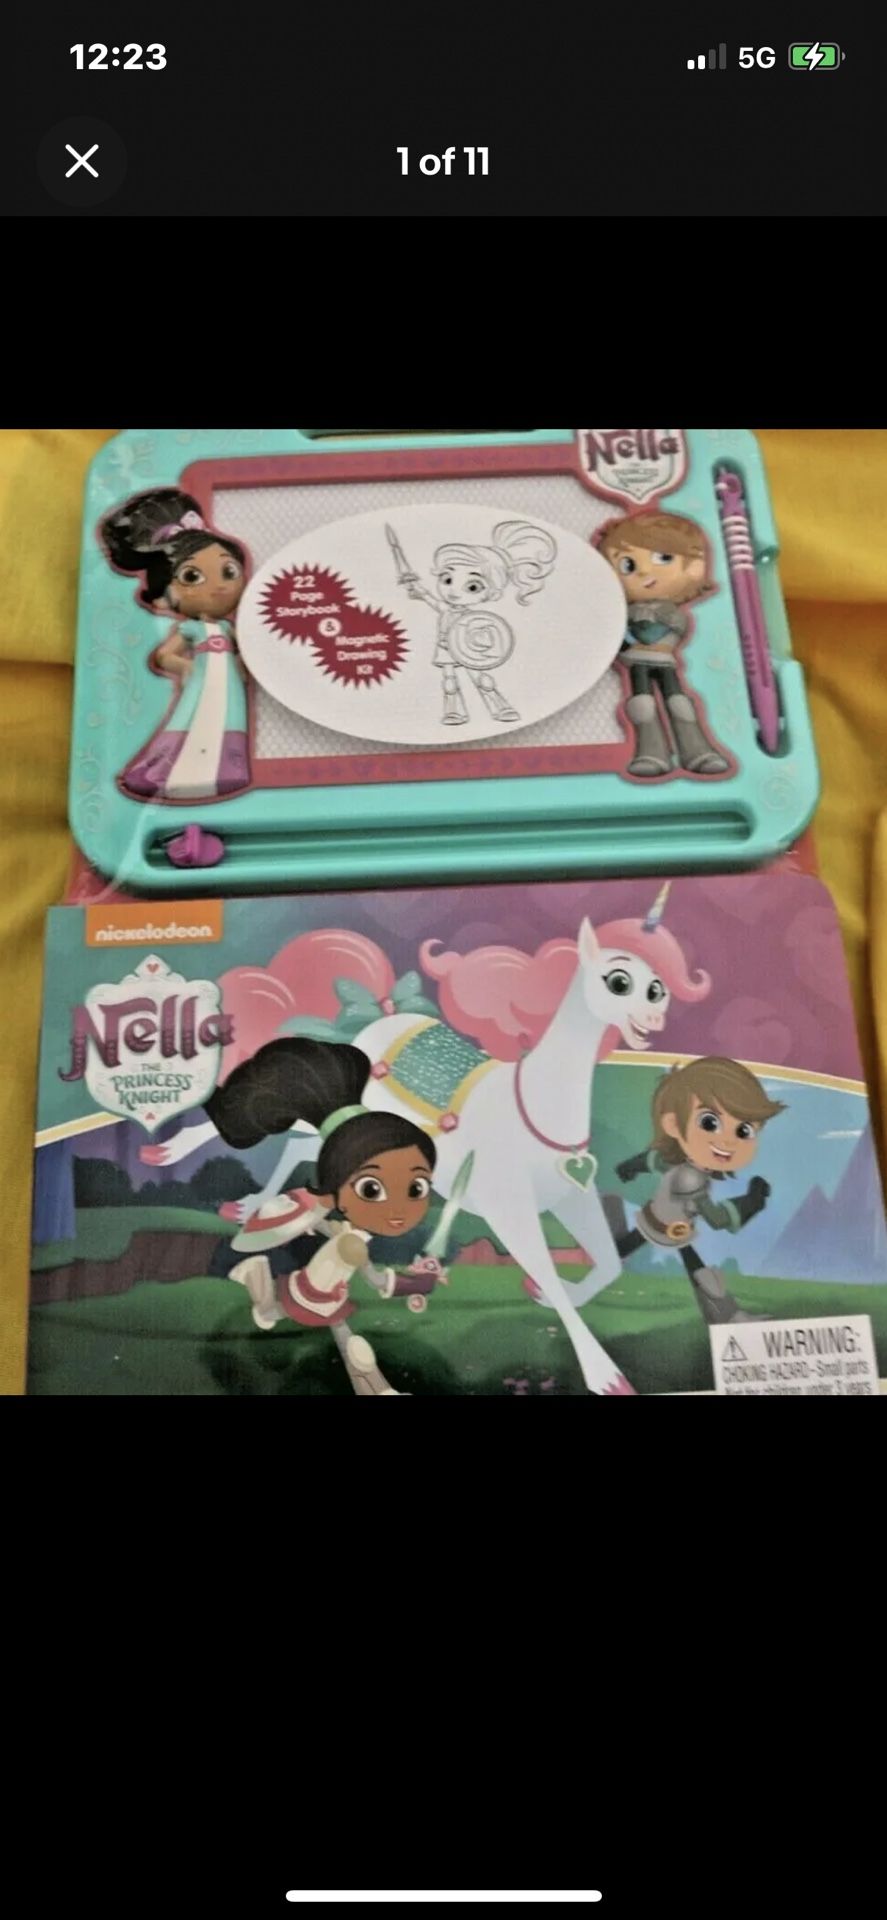 Nickelodeon Nella Princess Knight Magnetic Drawing Board & Book New